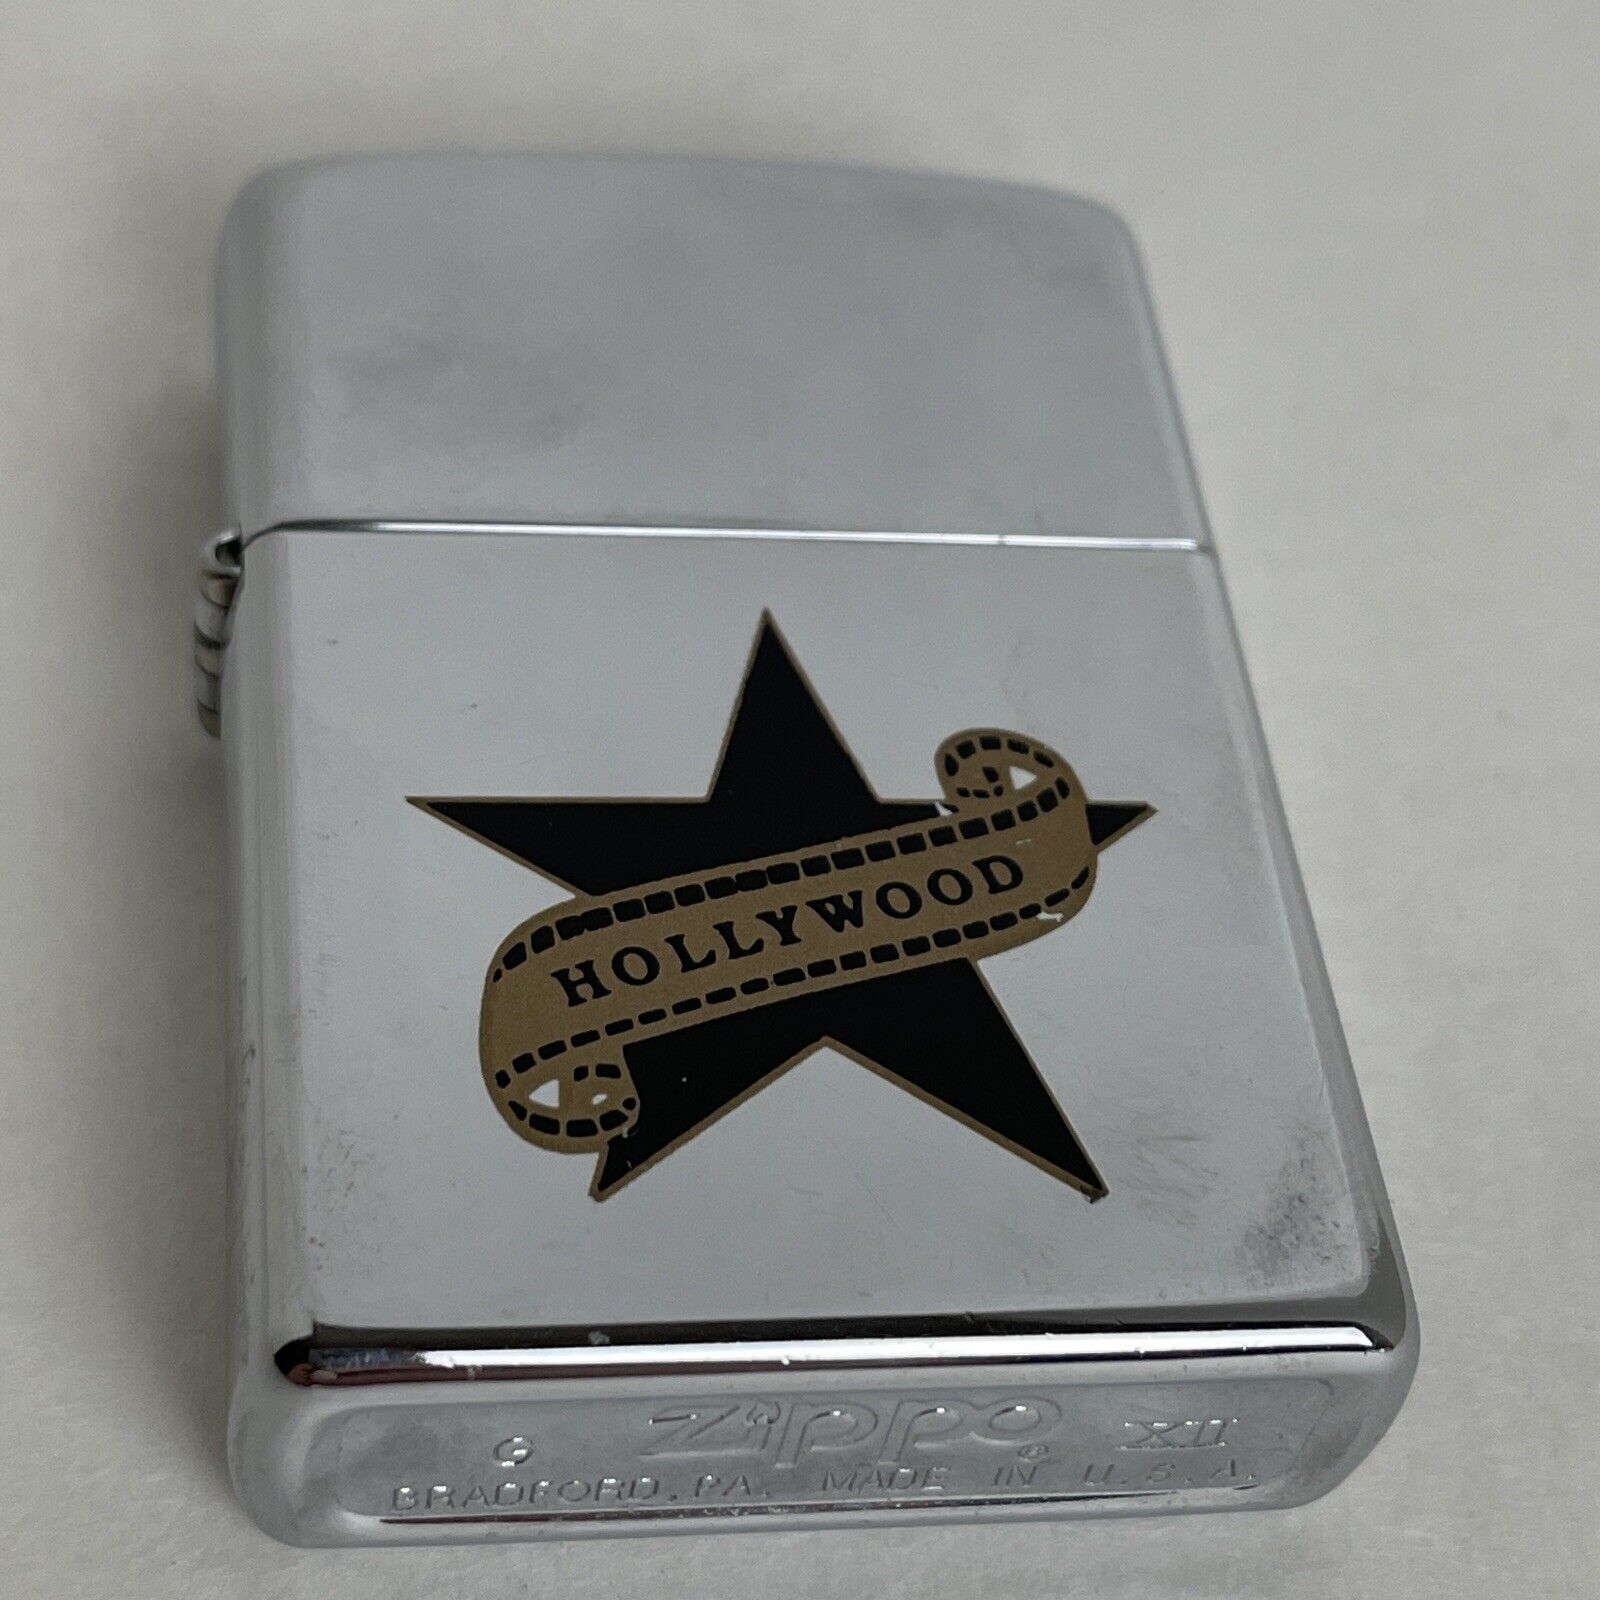 ZIPPO Lighter HOLLYWOOD Authentic Zippo Lighter WindProof Made In USA New